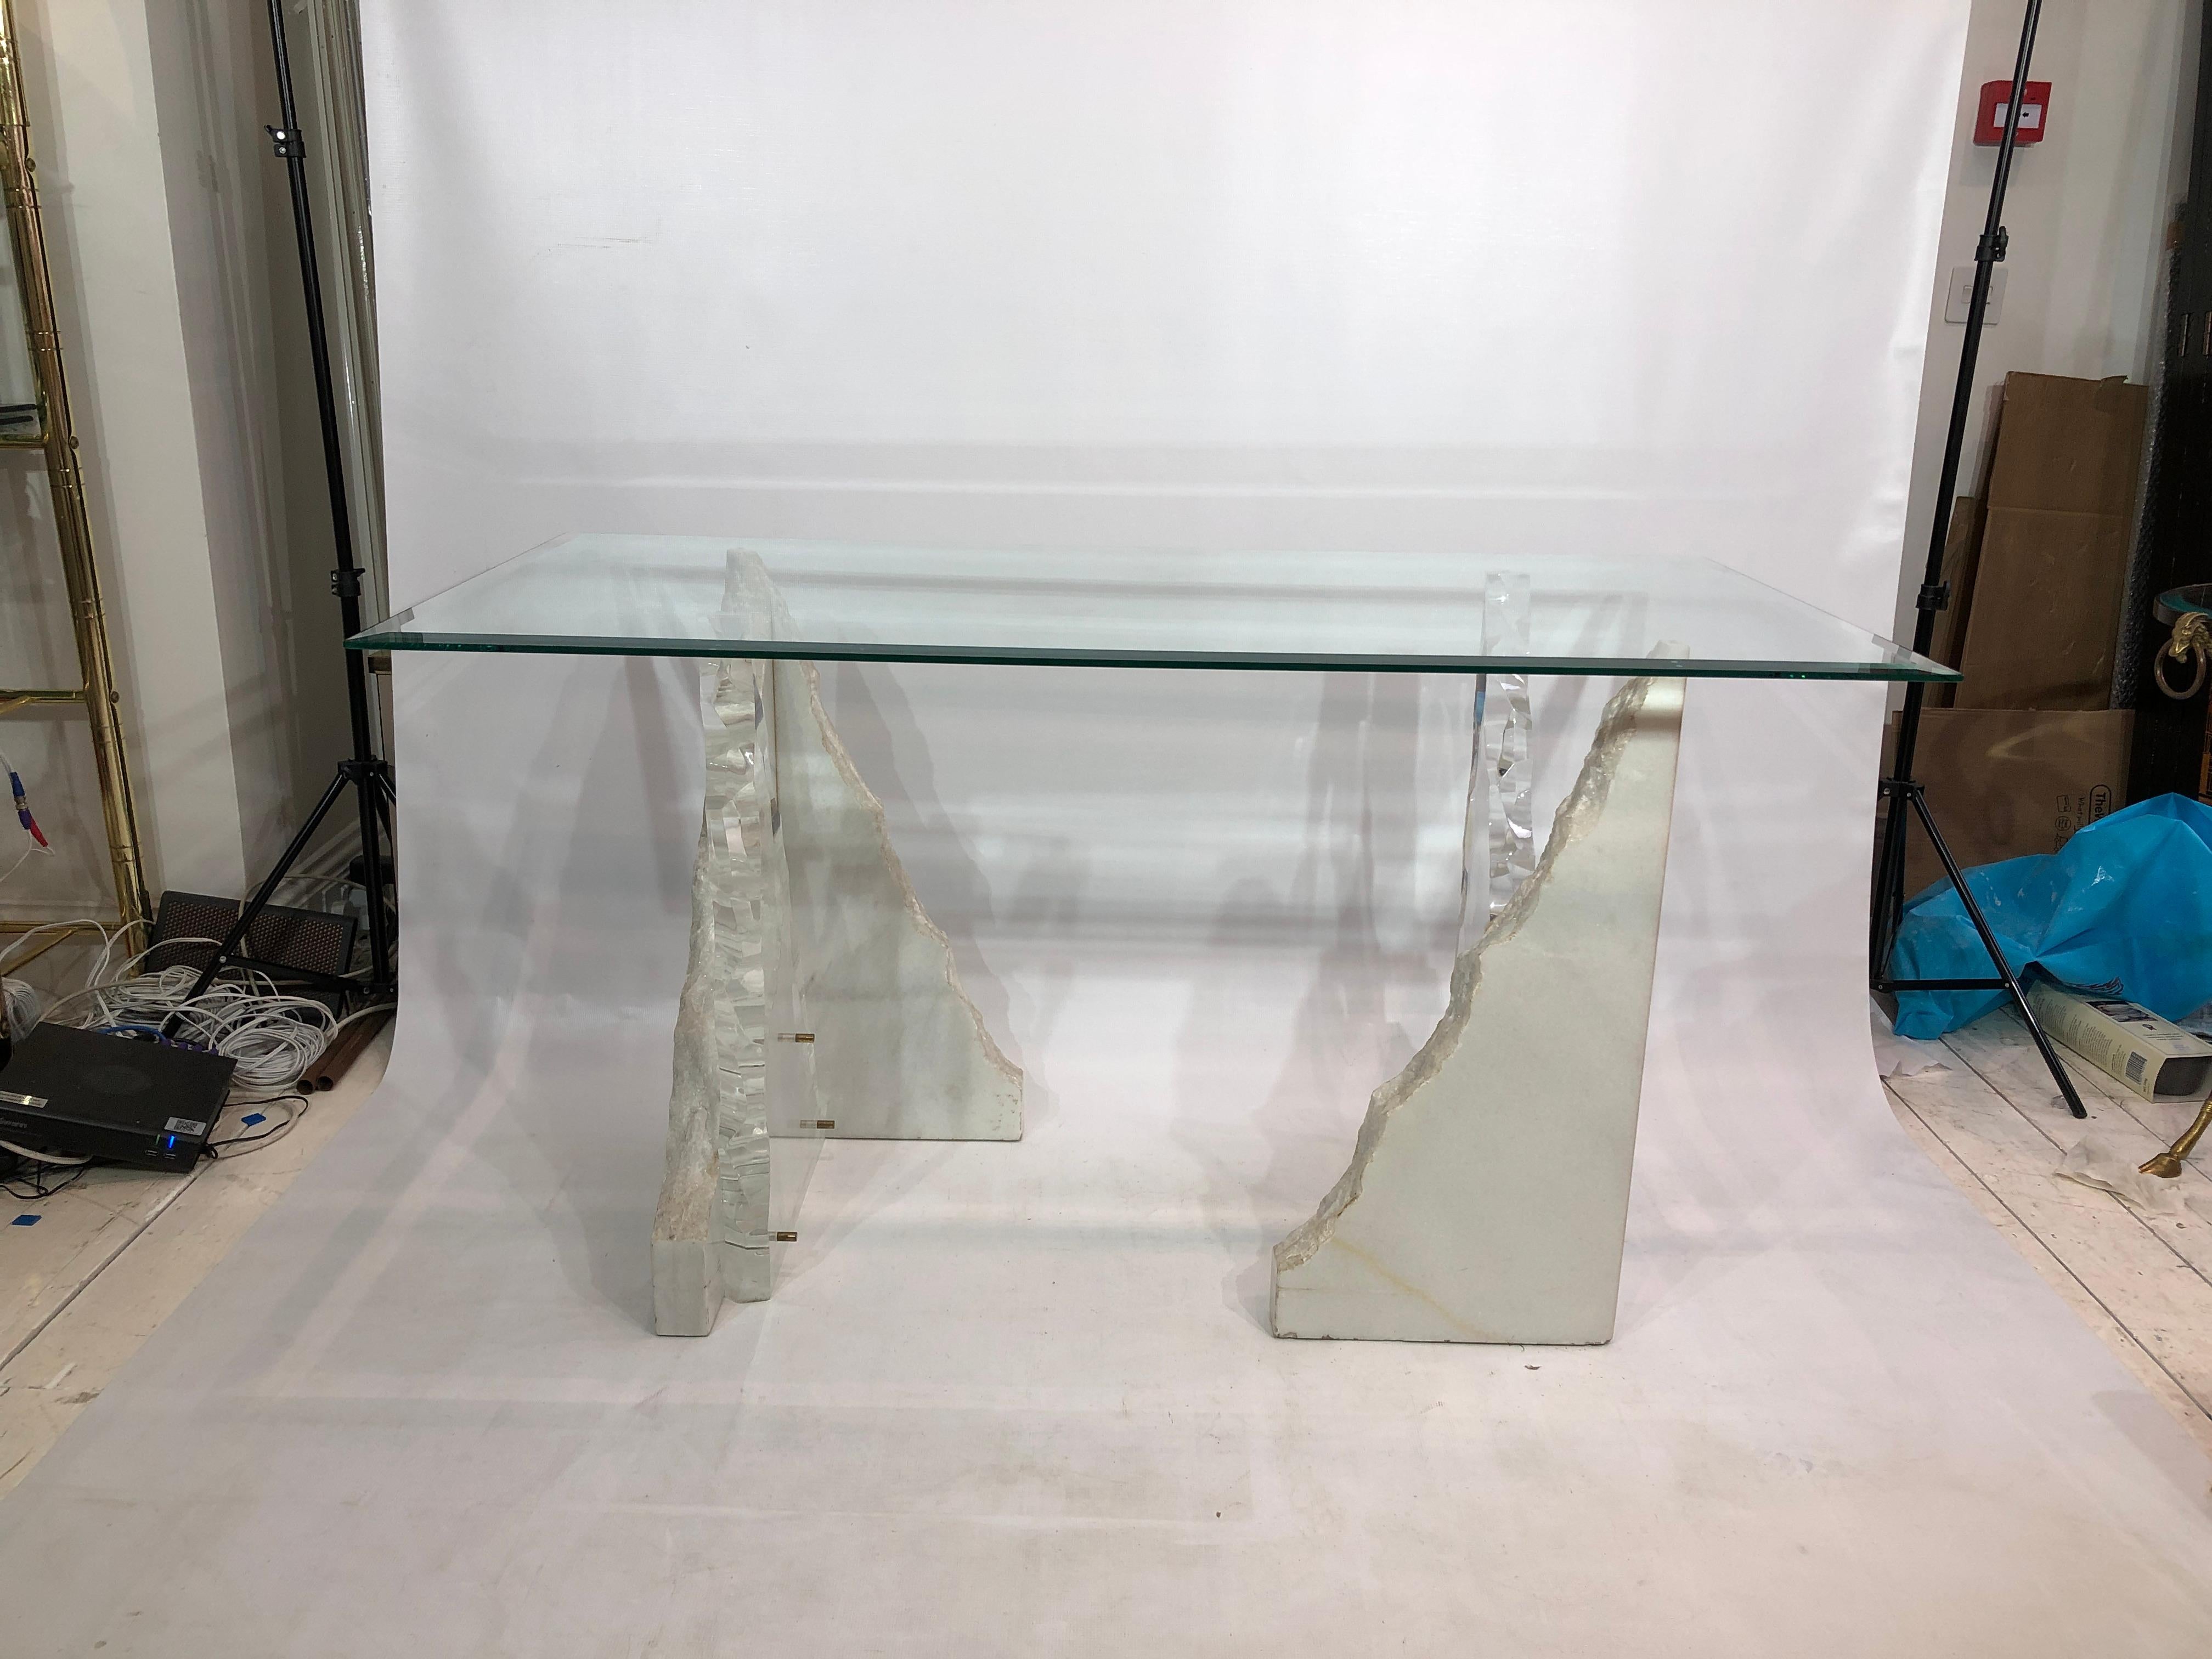 This striking glass top desk or table, manufactured by popular 1970s acrylics company Lion in Frost, features two thick lucite and raw edge carrara marble corner pieces with brass fixings, strongly resembling an iceberg or stalagmite. A sheet of